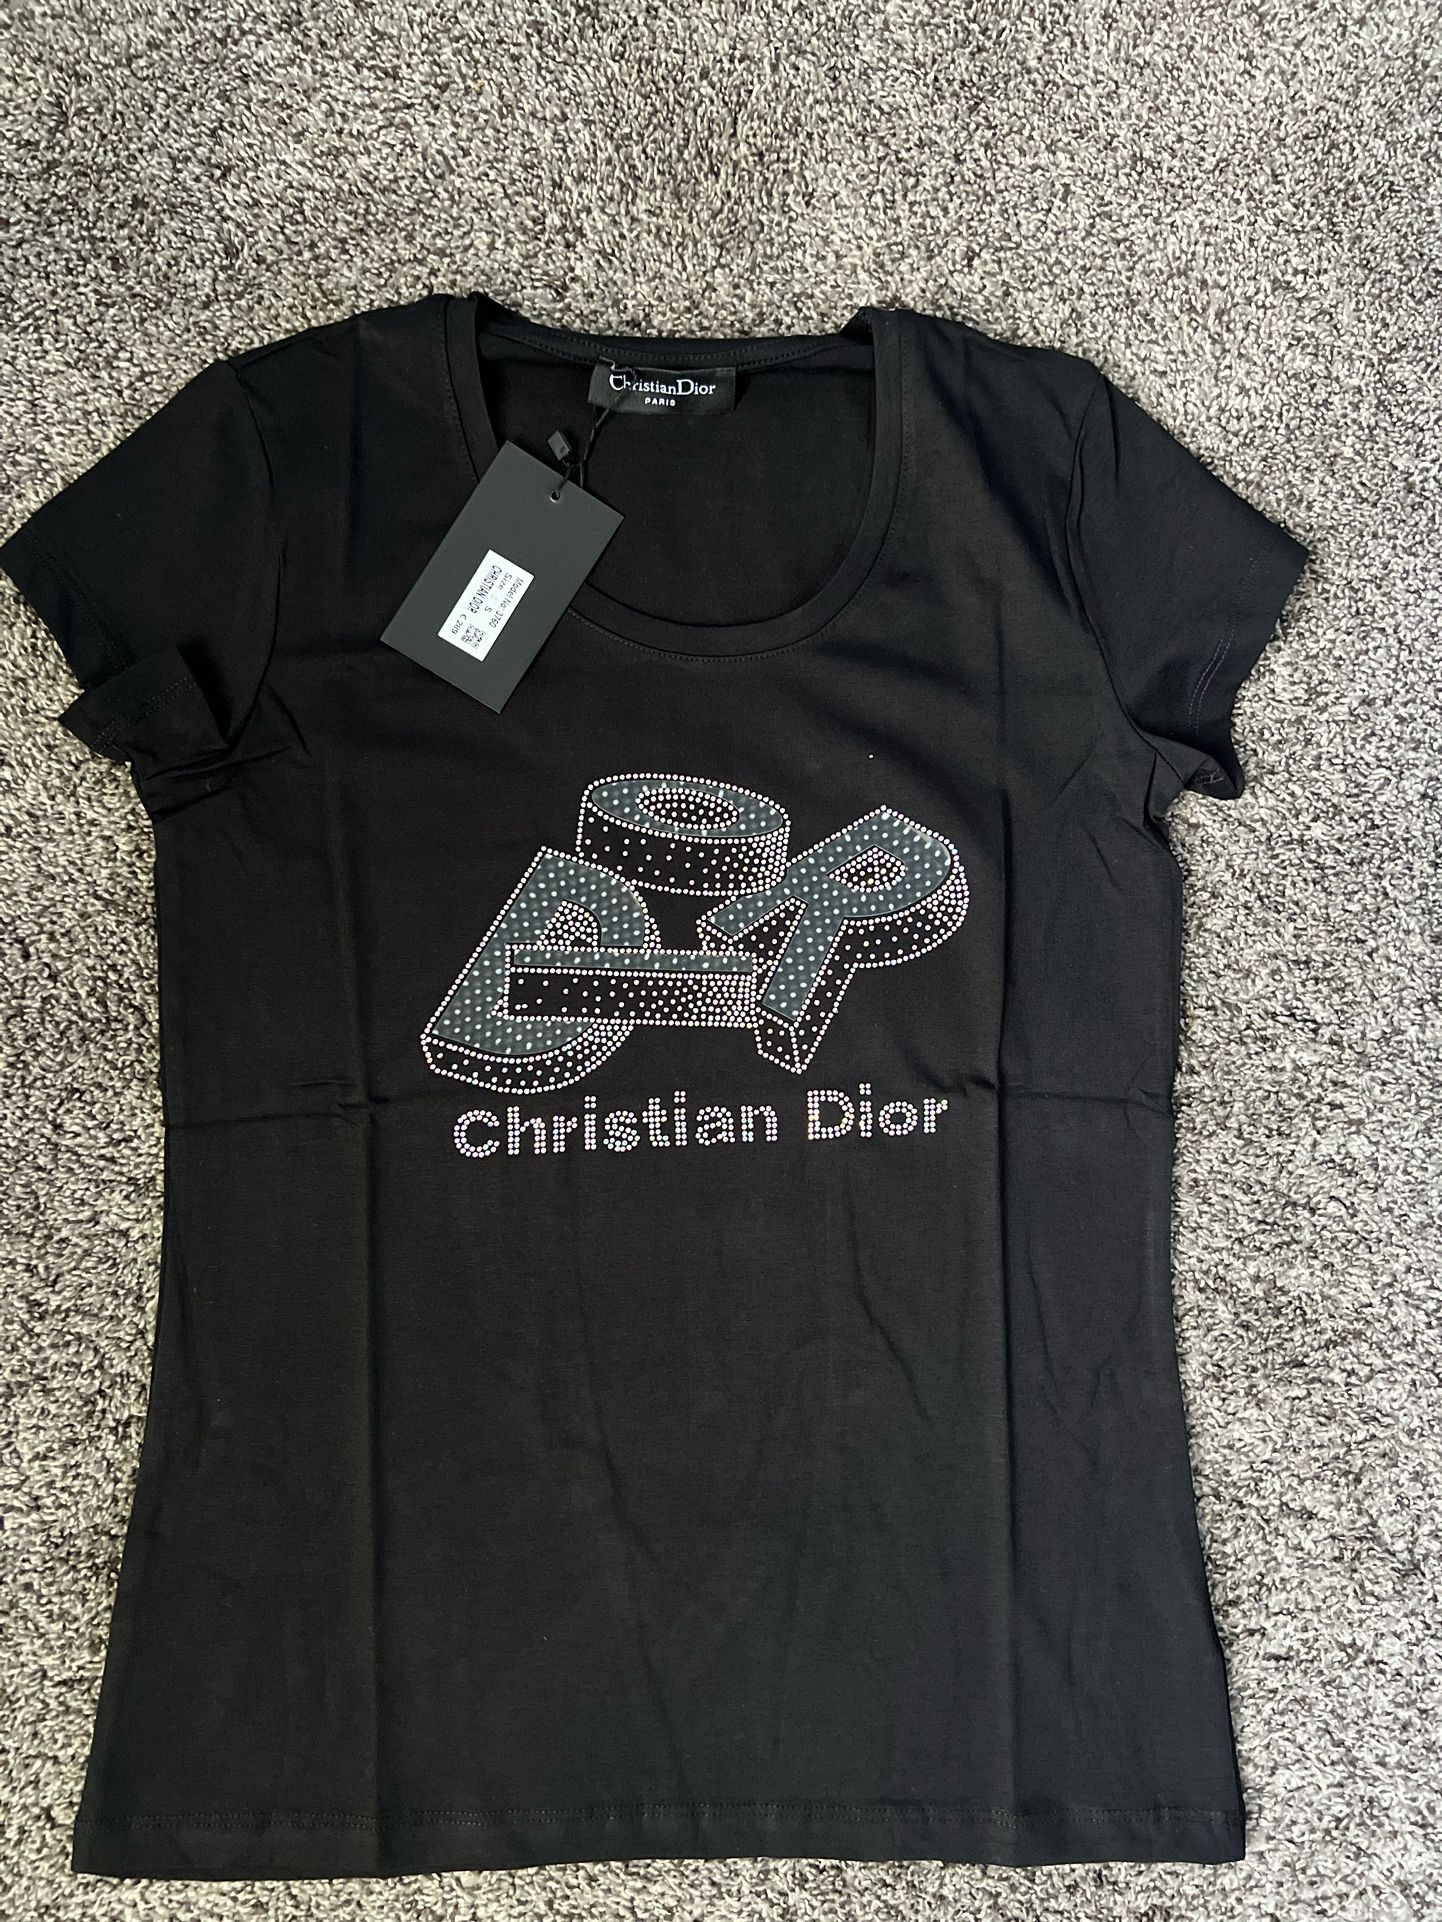 D.iiorr Women’s T Shirt. All Sizes Available: Local Pickup And Shipping Available 